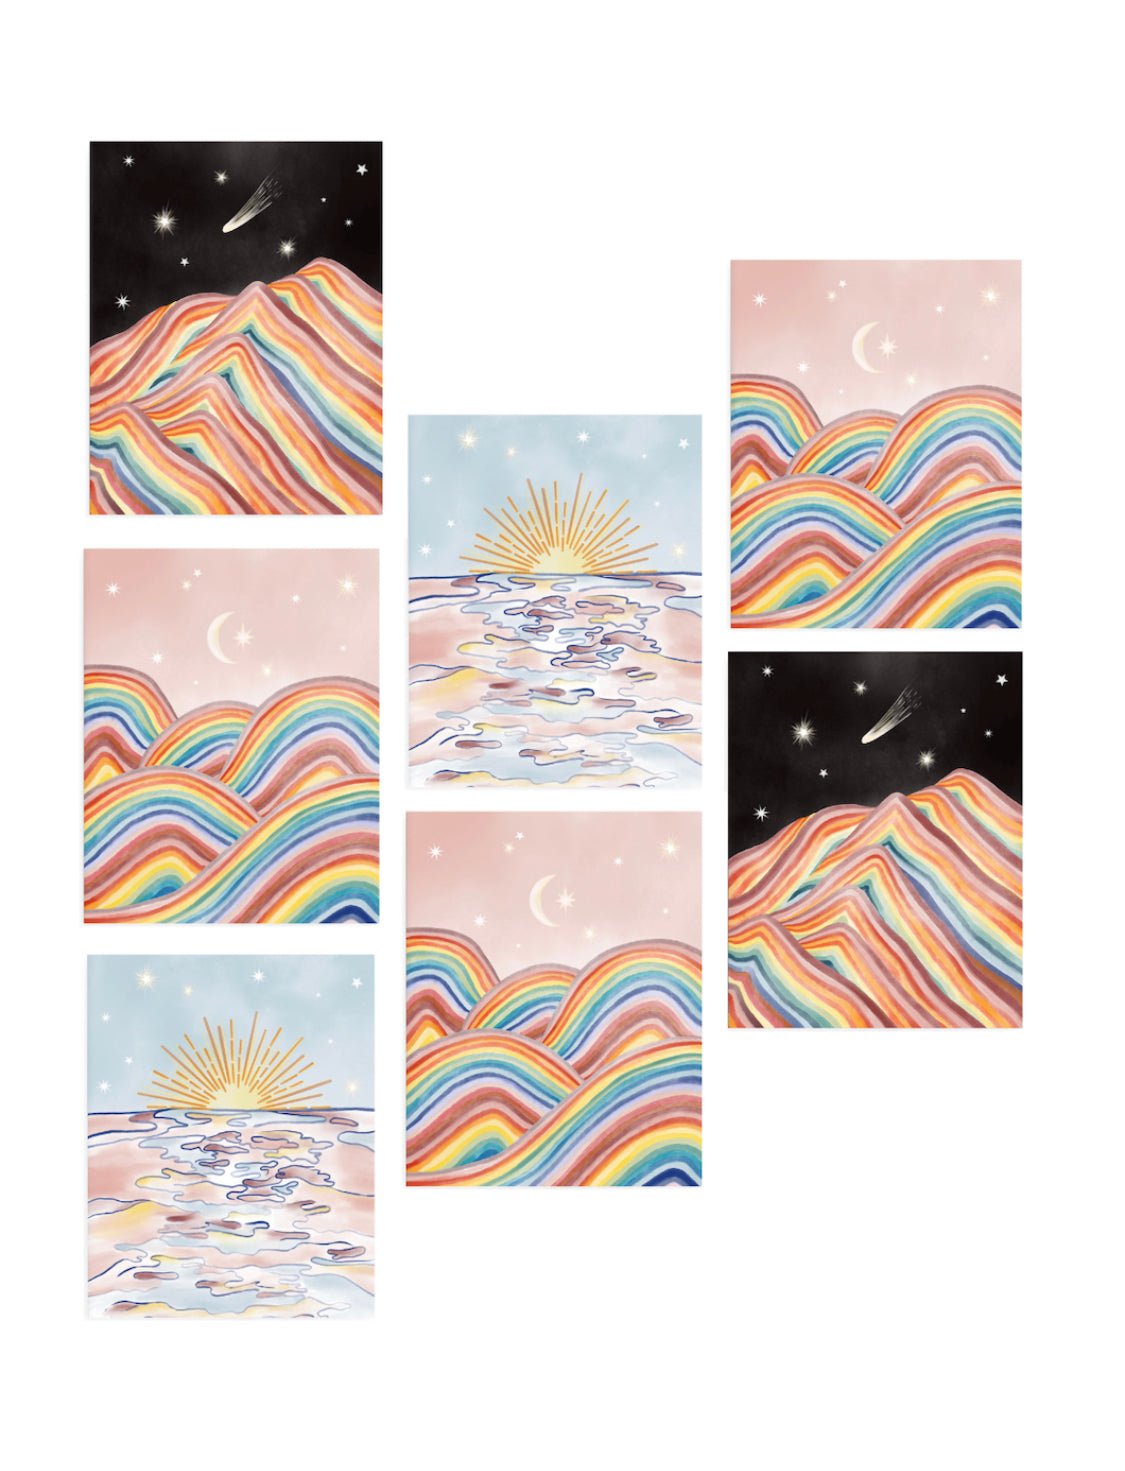 Landscape card pack. 1) Black sky with shooting stars and rainbow mountain. 2) Pink sky with moon, stars, and rainbow mountains. 3) Blue sky with sunset on a pink and yellow ocean.